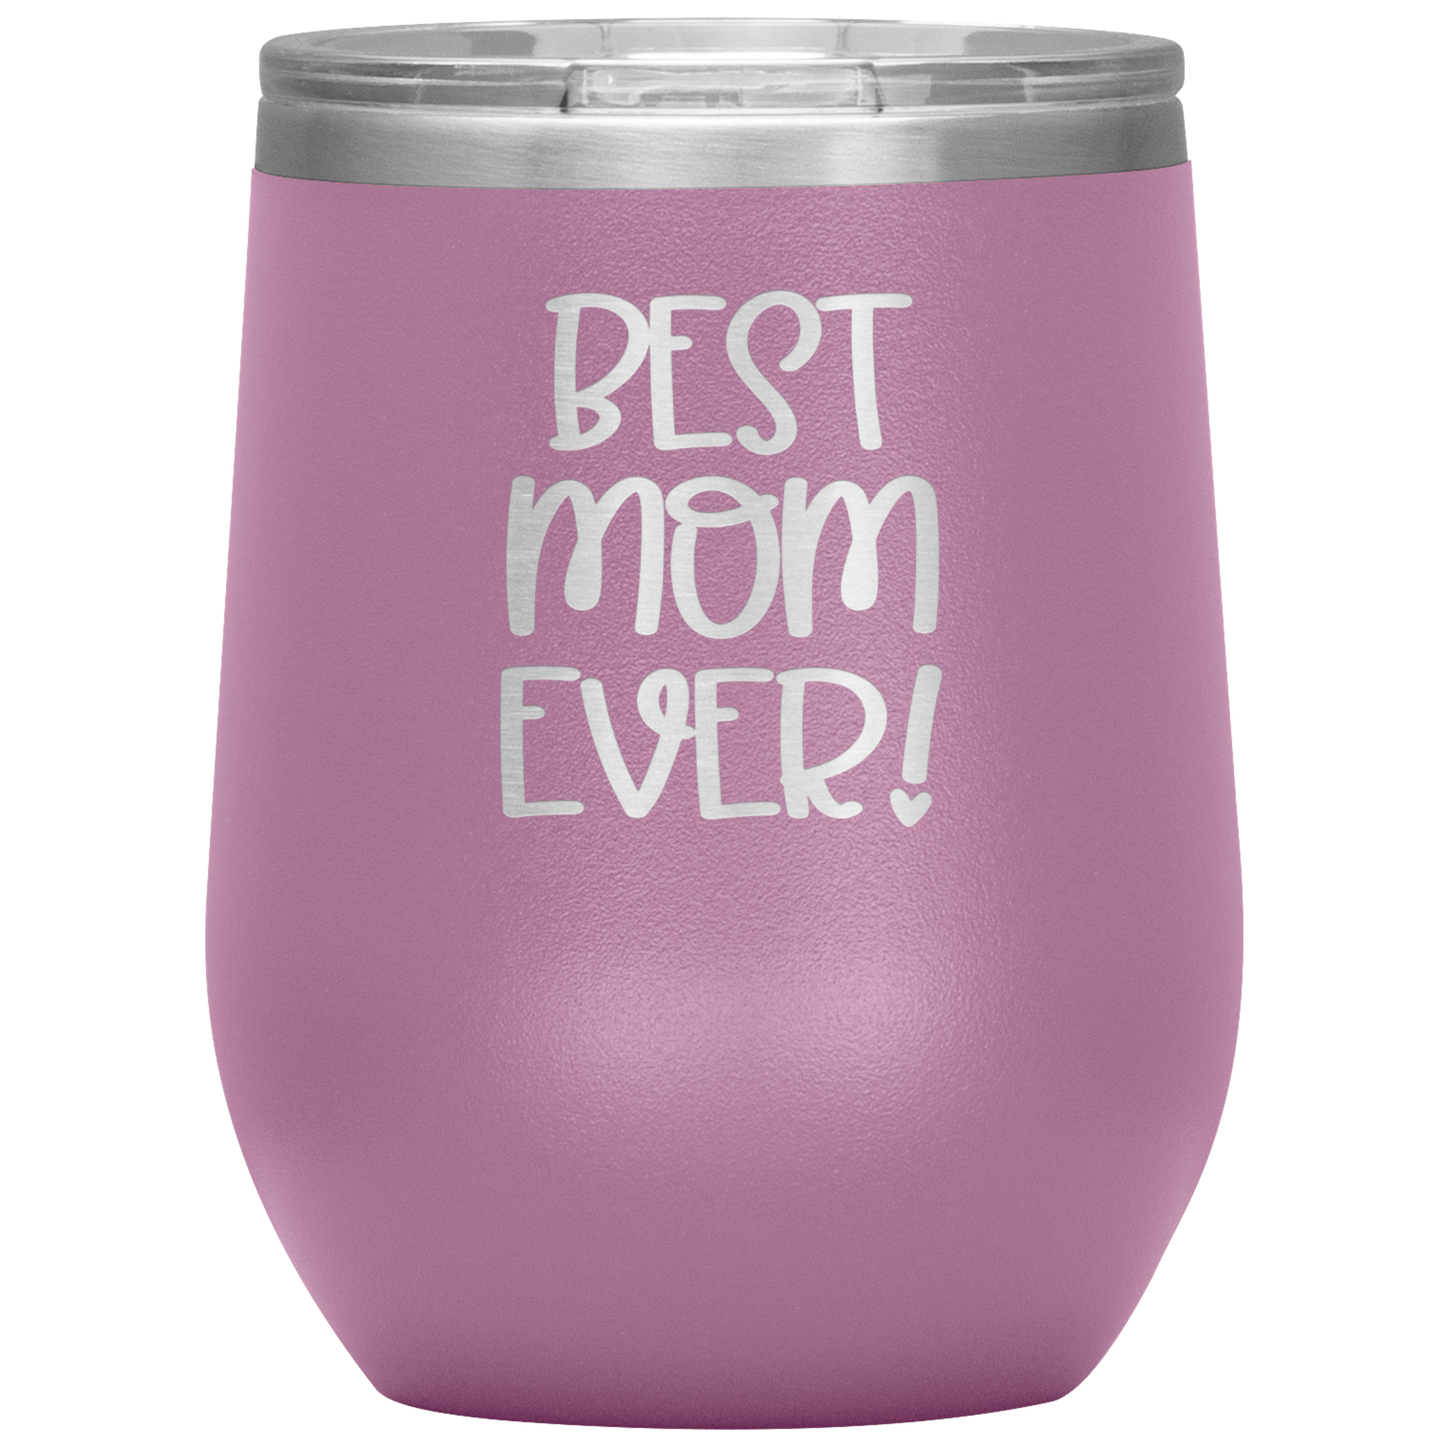 "Best Mom Ever!" 12 oz. Insulated Stainless Steel Wine Tumbler with Lid